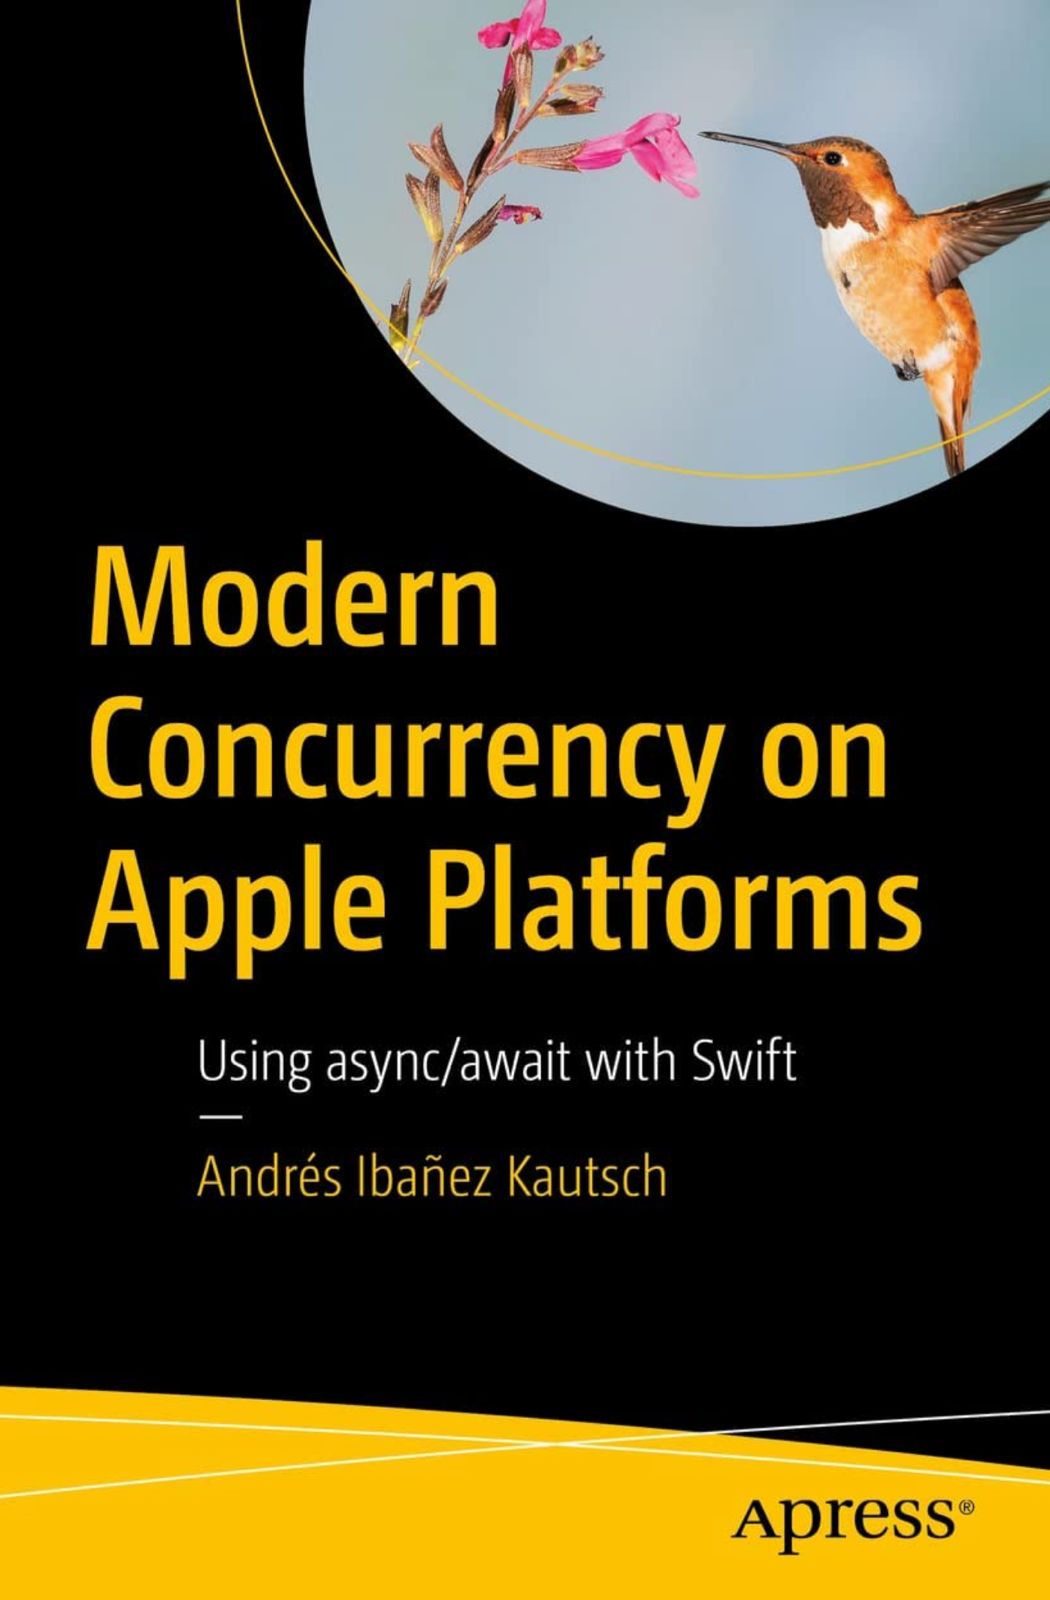 Modern Concurrency on Apple Platforms Book Cover